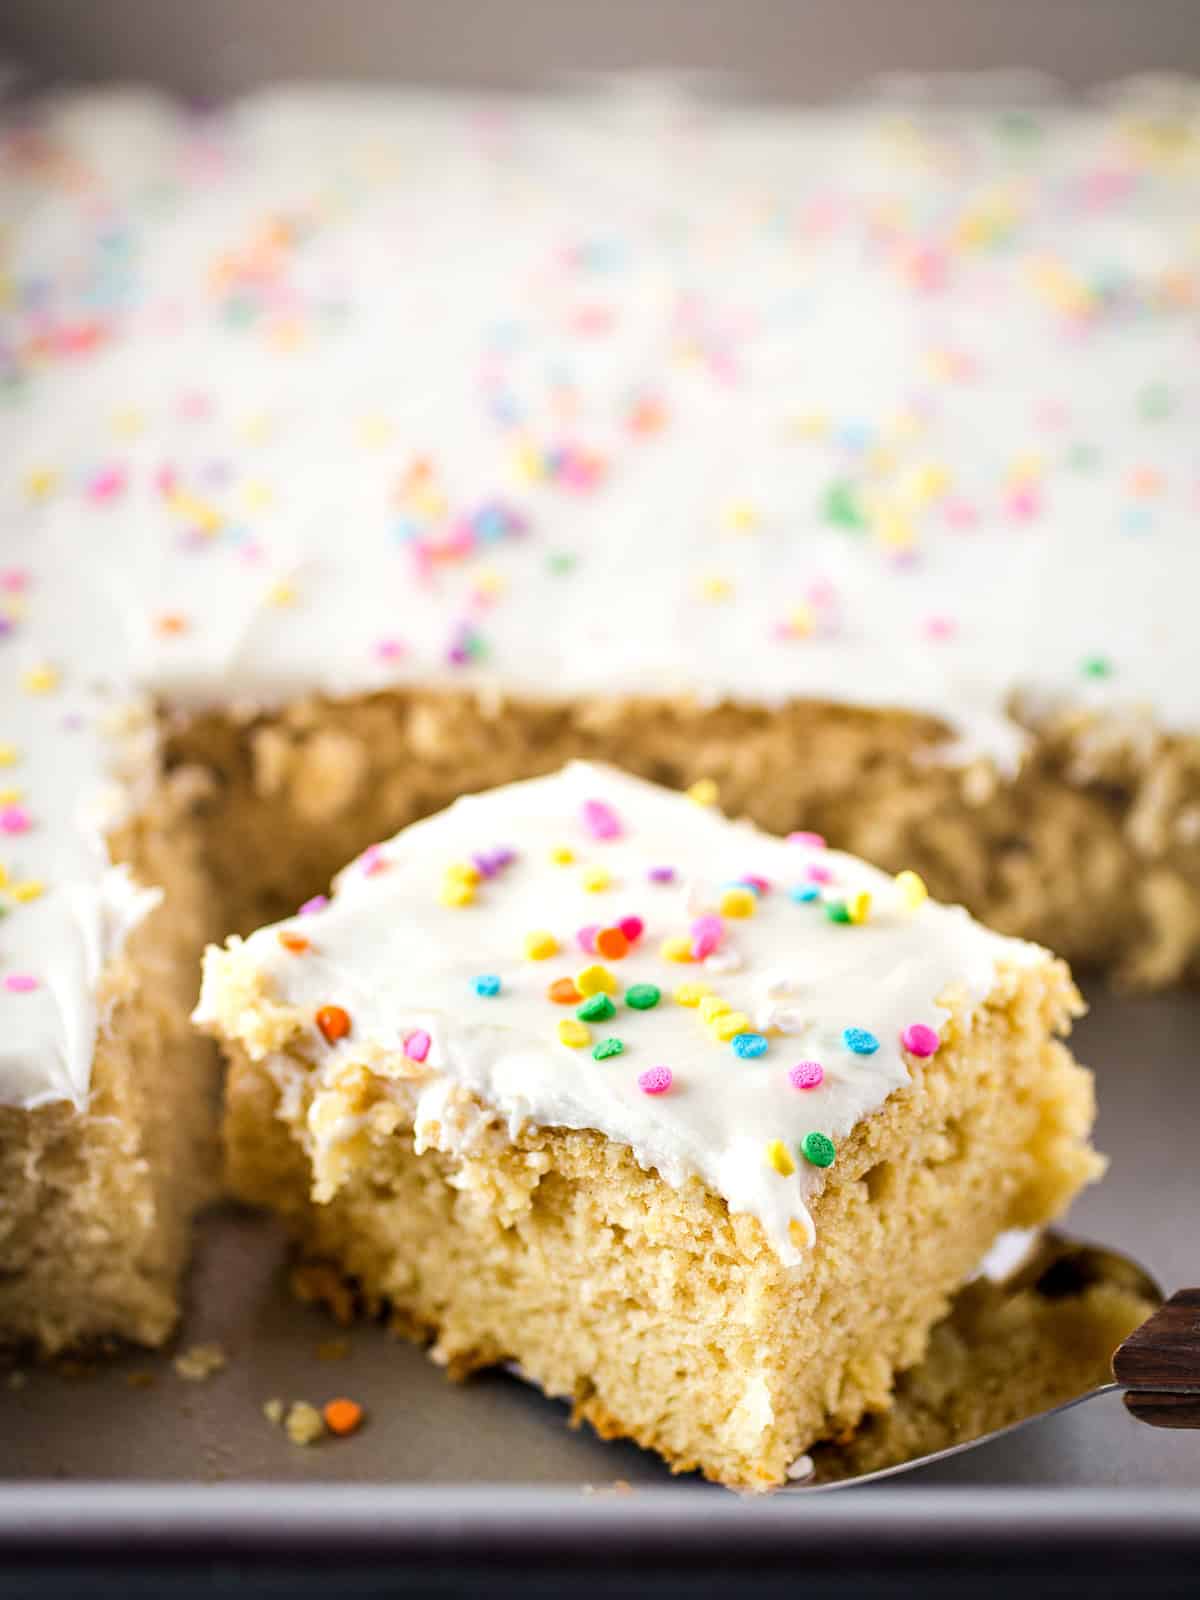 Gluten free vanilla sheet cake in the pan with frosting and sprinkles on top.